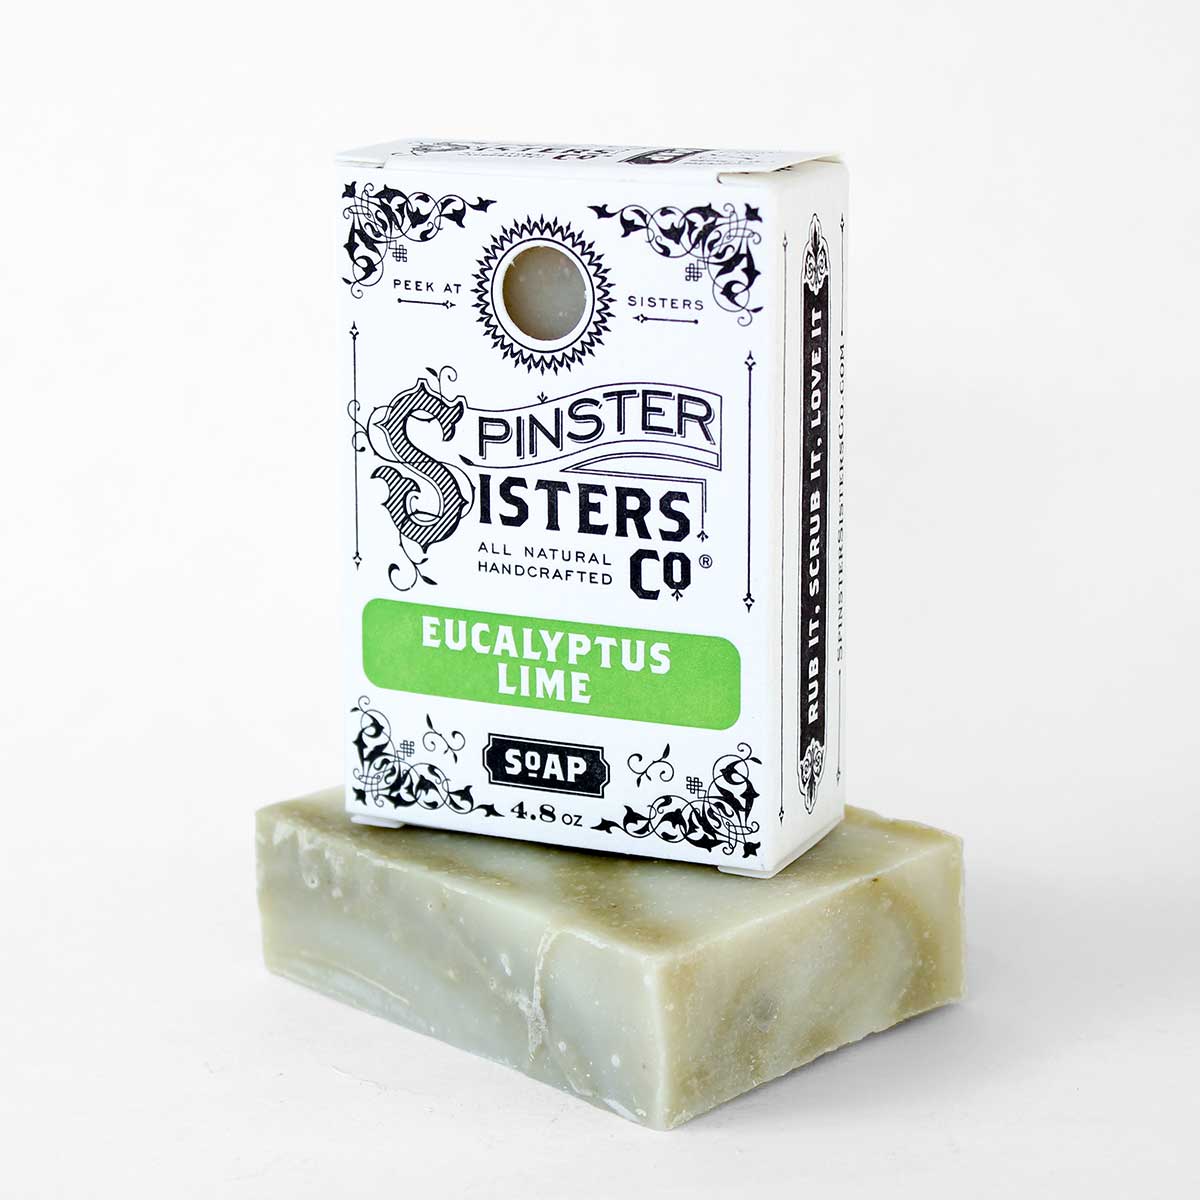 Spinster Sisters Bath Soap - Eucalyptus Lime w/Pumice